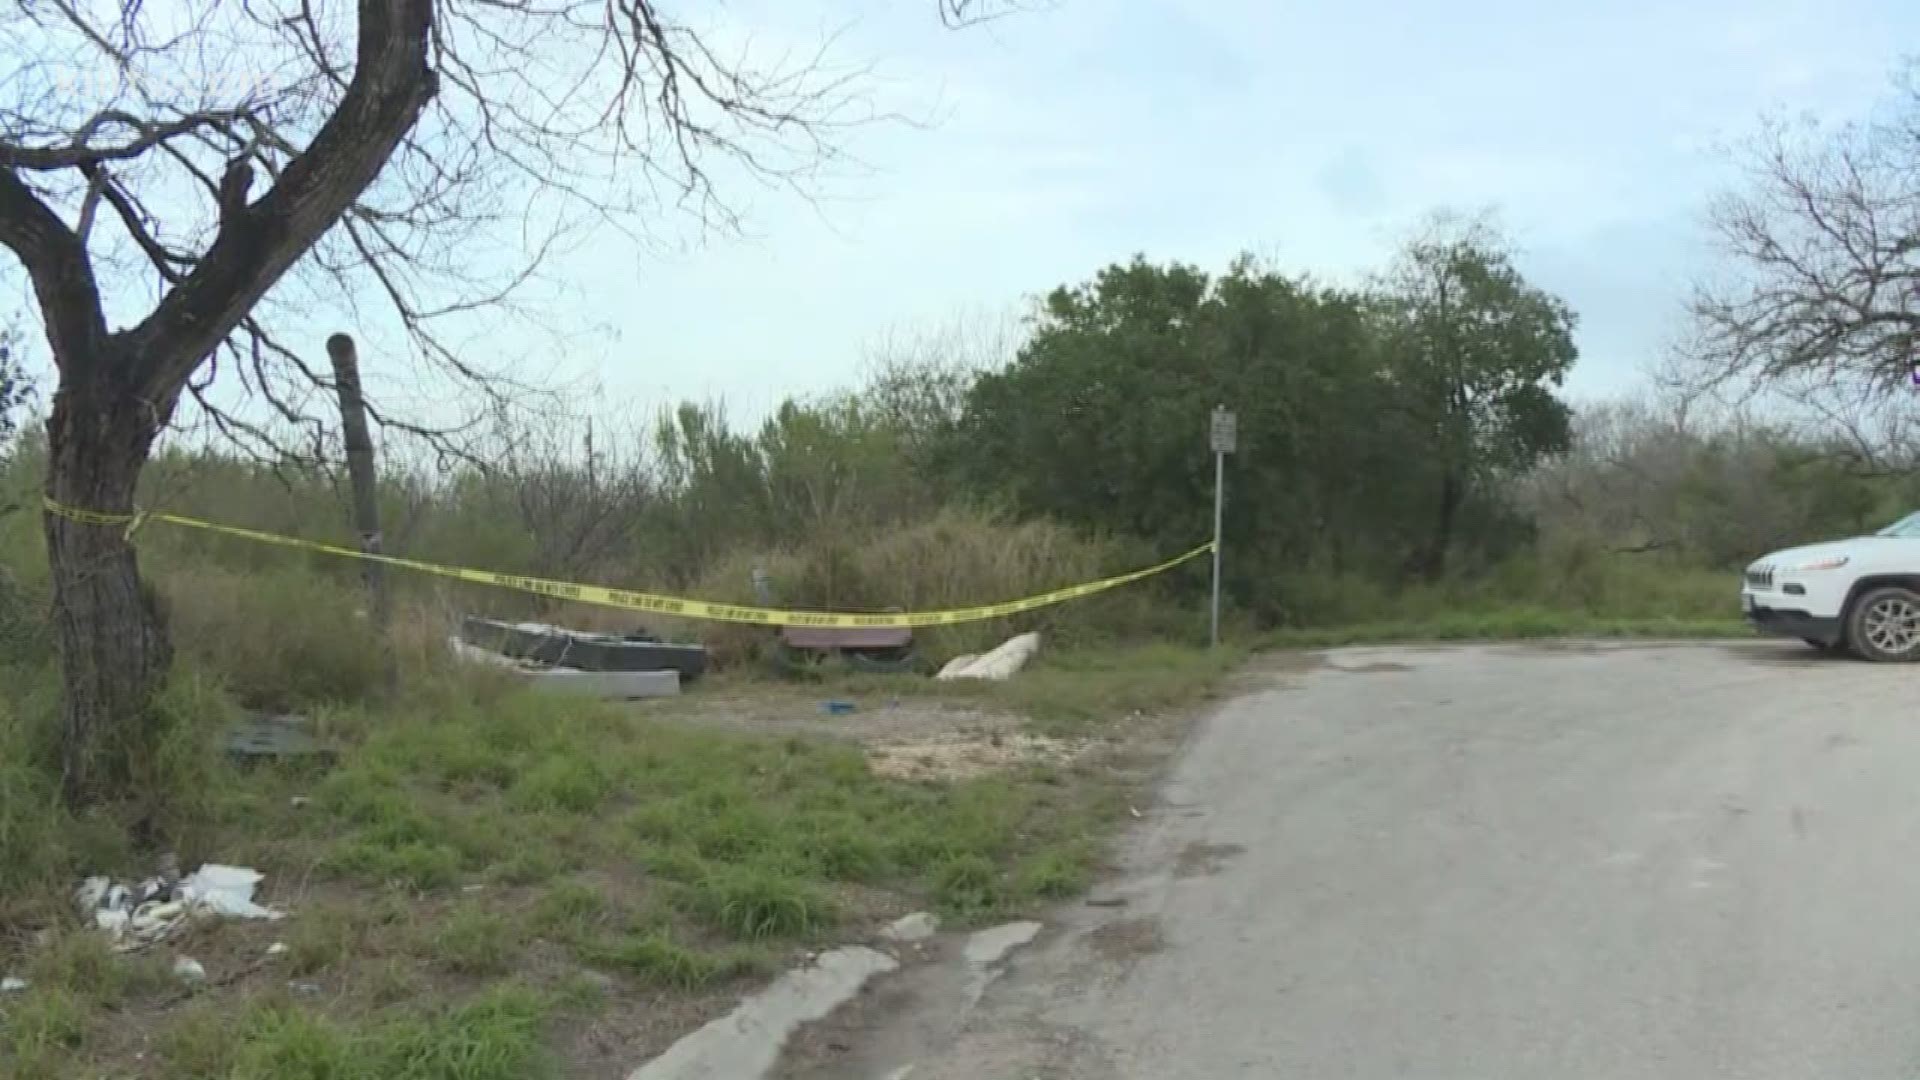 Kingsville police are investigating after a dead body was discovered Wednesday behind the Kleberg County Sheriff's Office.